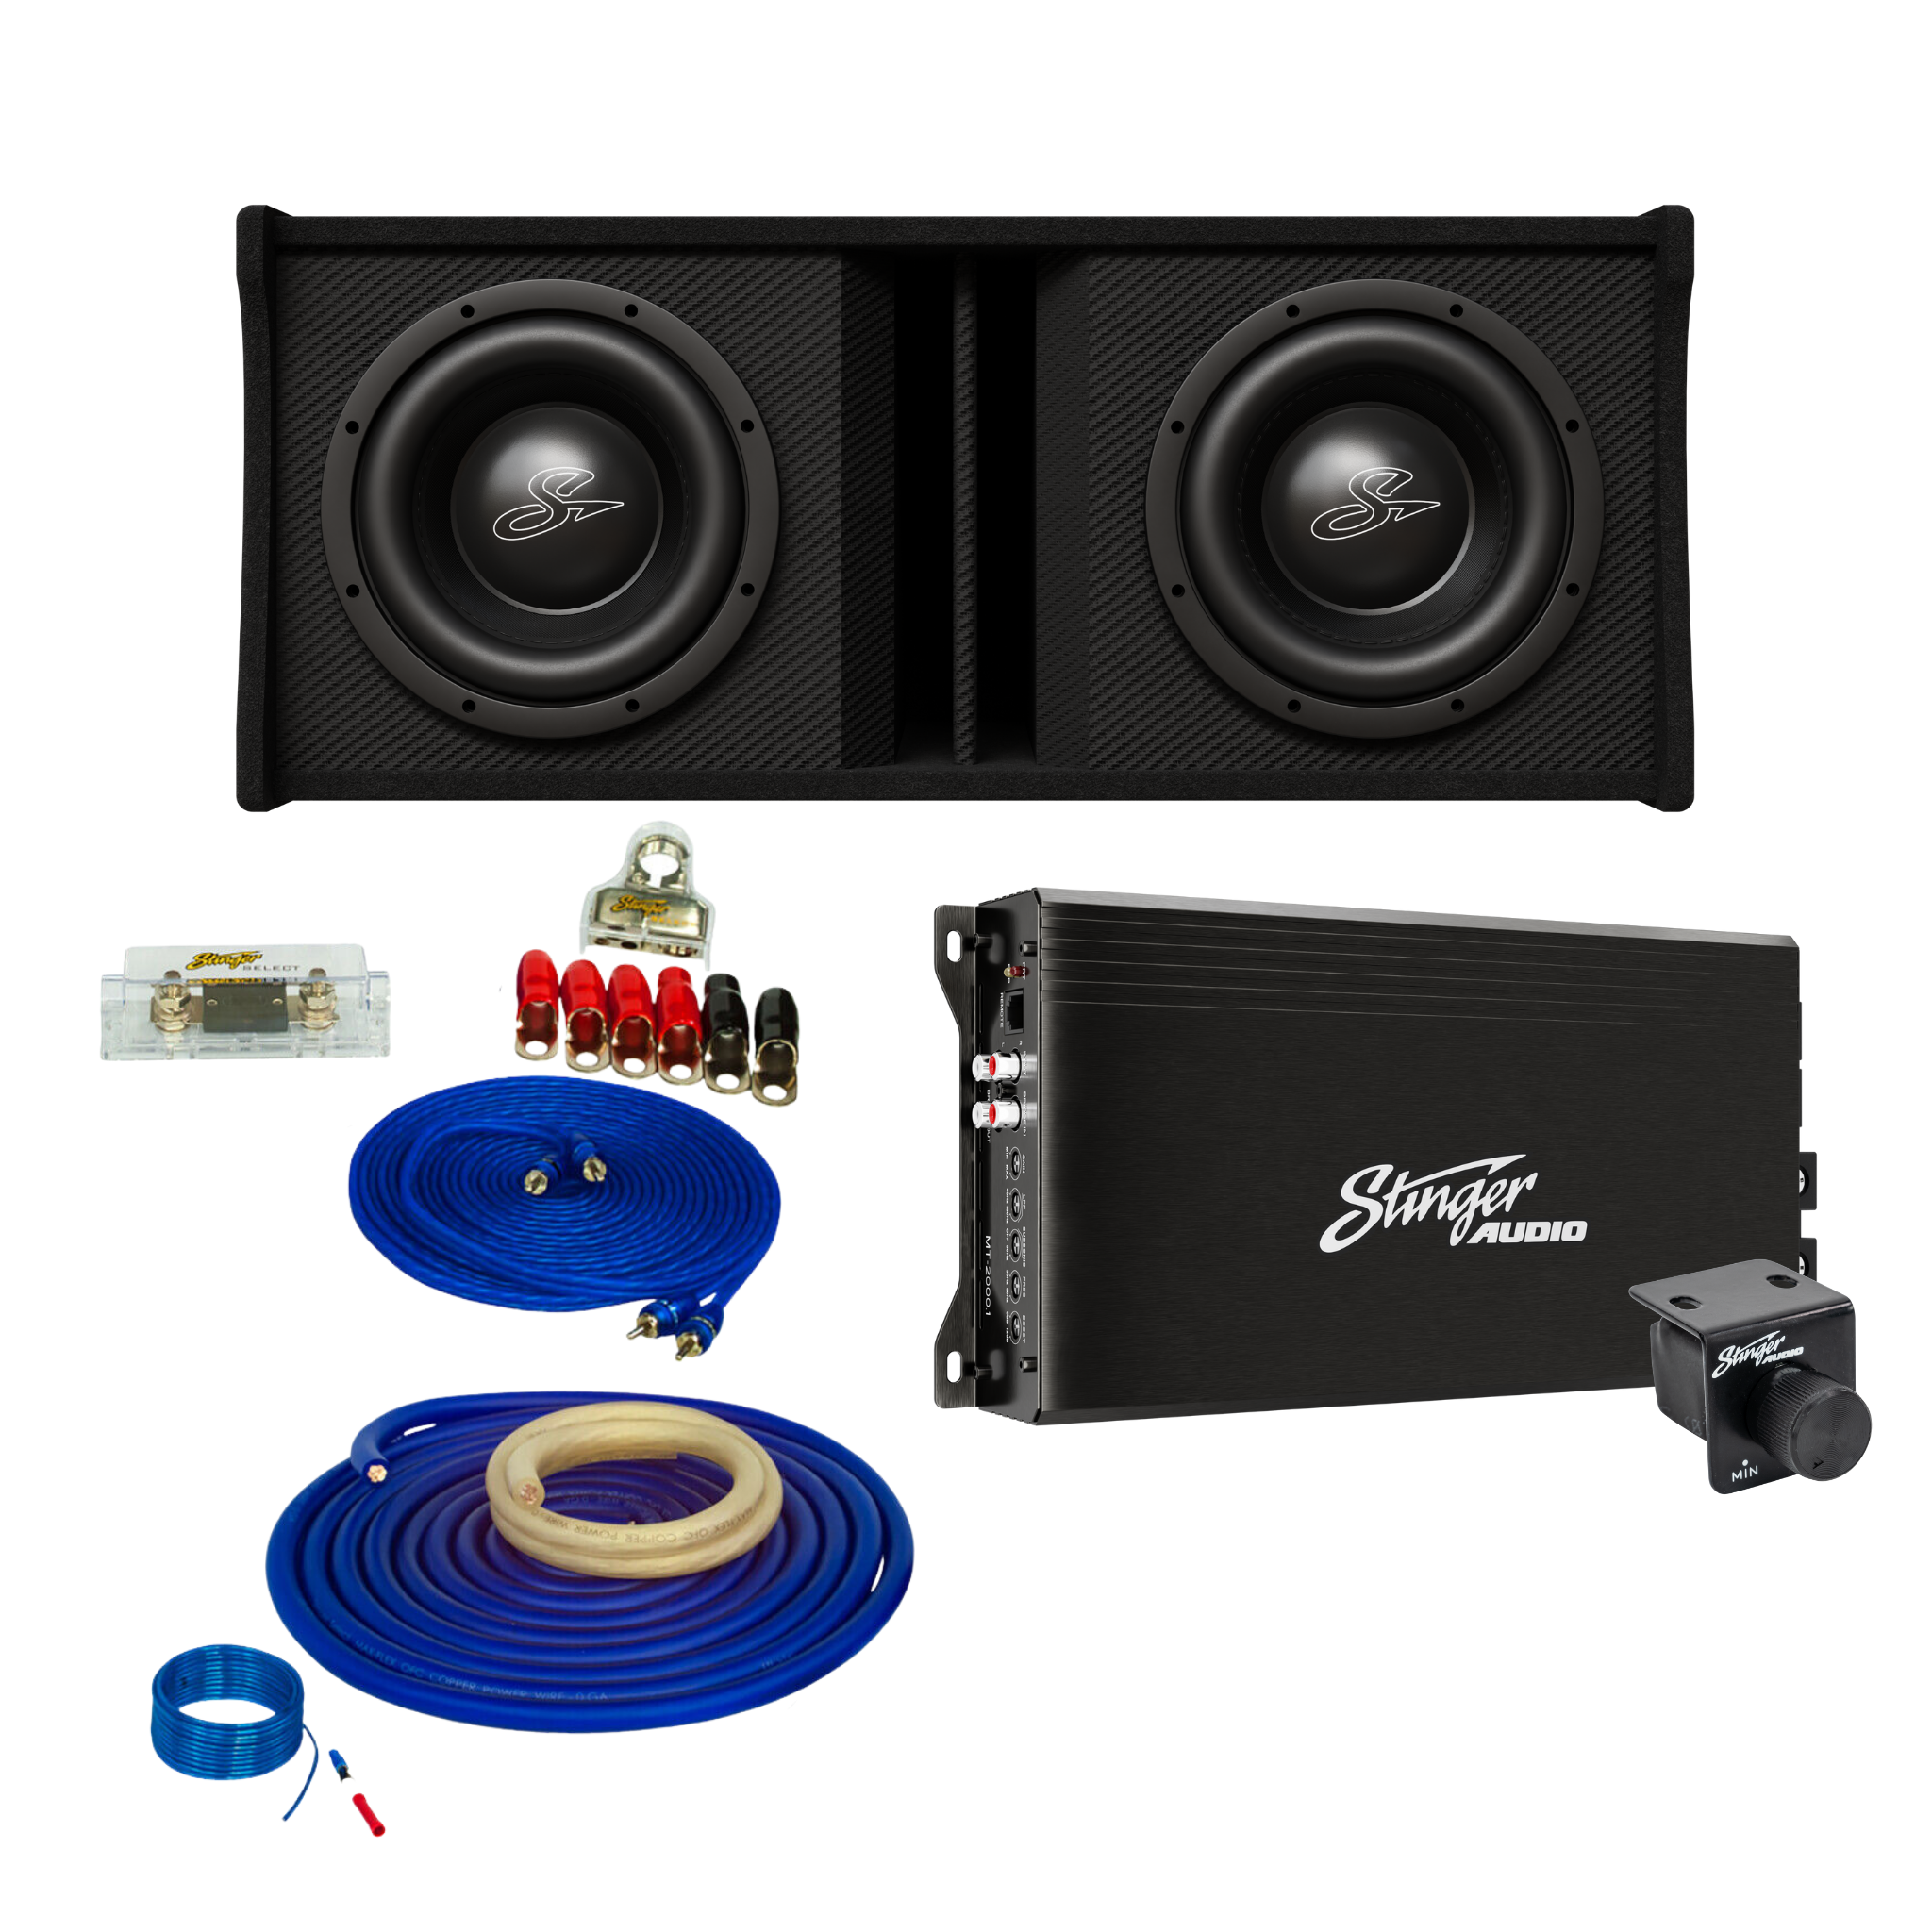 Dual 10" 2,000 Watt (RMS) Loaded Ported Subwoofer Enclosure (2,000 Watts RMS/3,000 Watts Max) Bass Package with Amplifier & Complete Wiring Kit